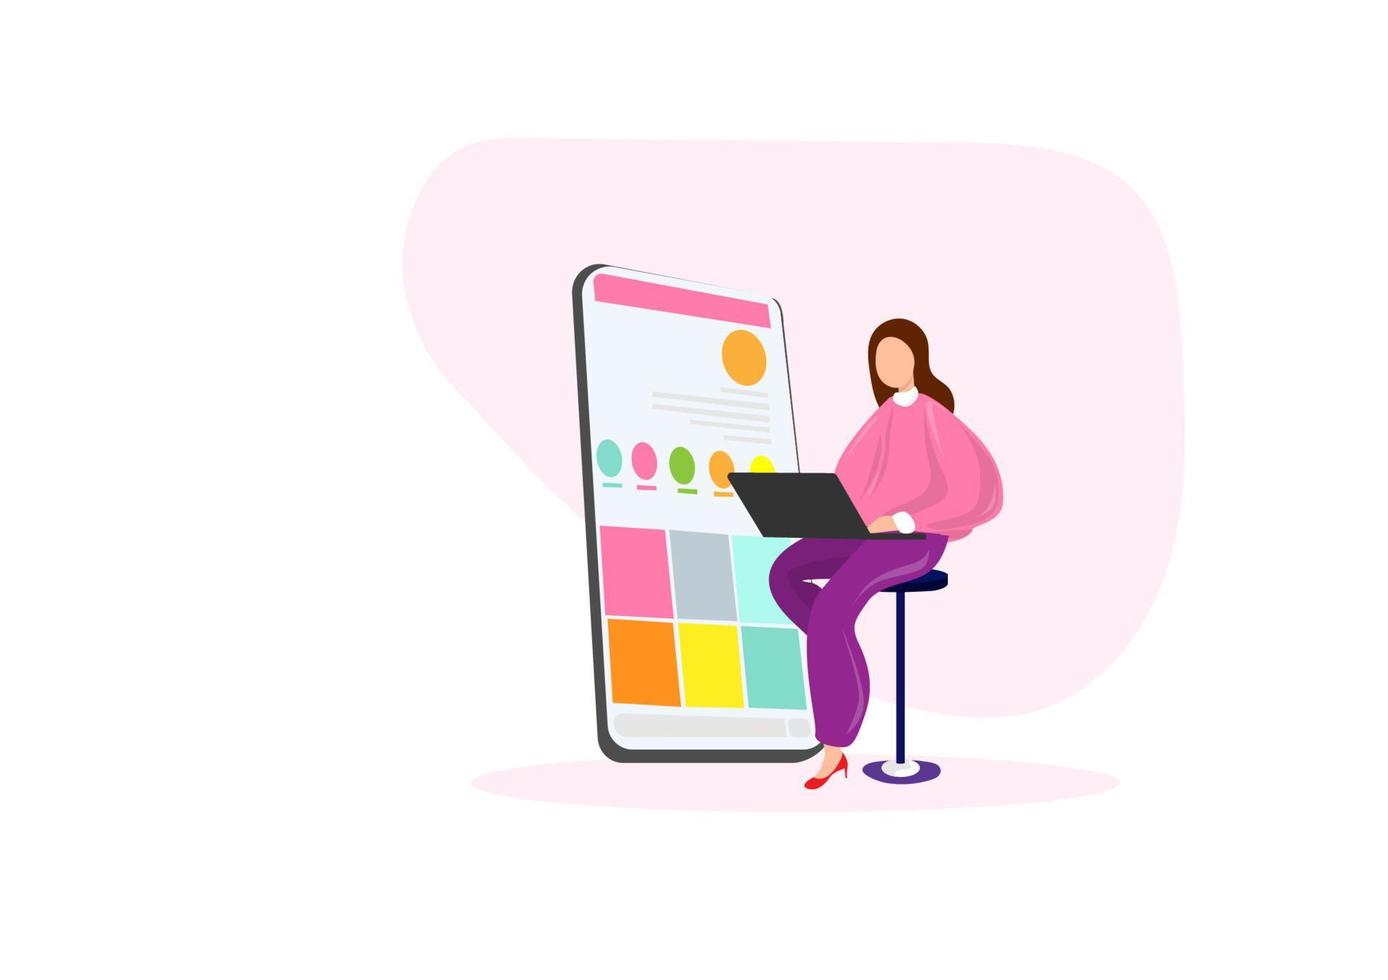 Cloud database content layout concept, young woman uploading data to display to social media, colorful flat vector illustration